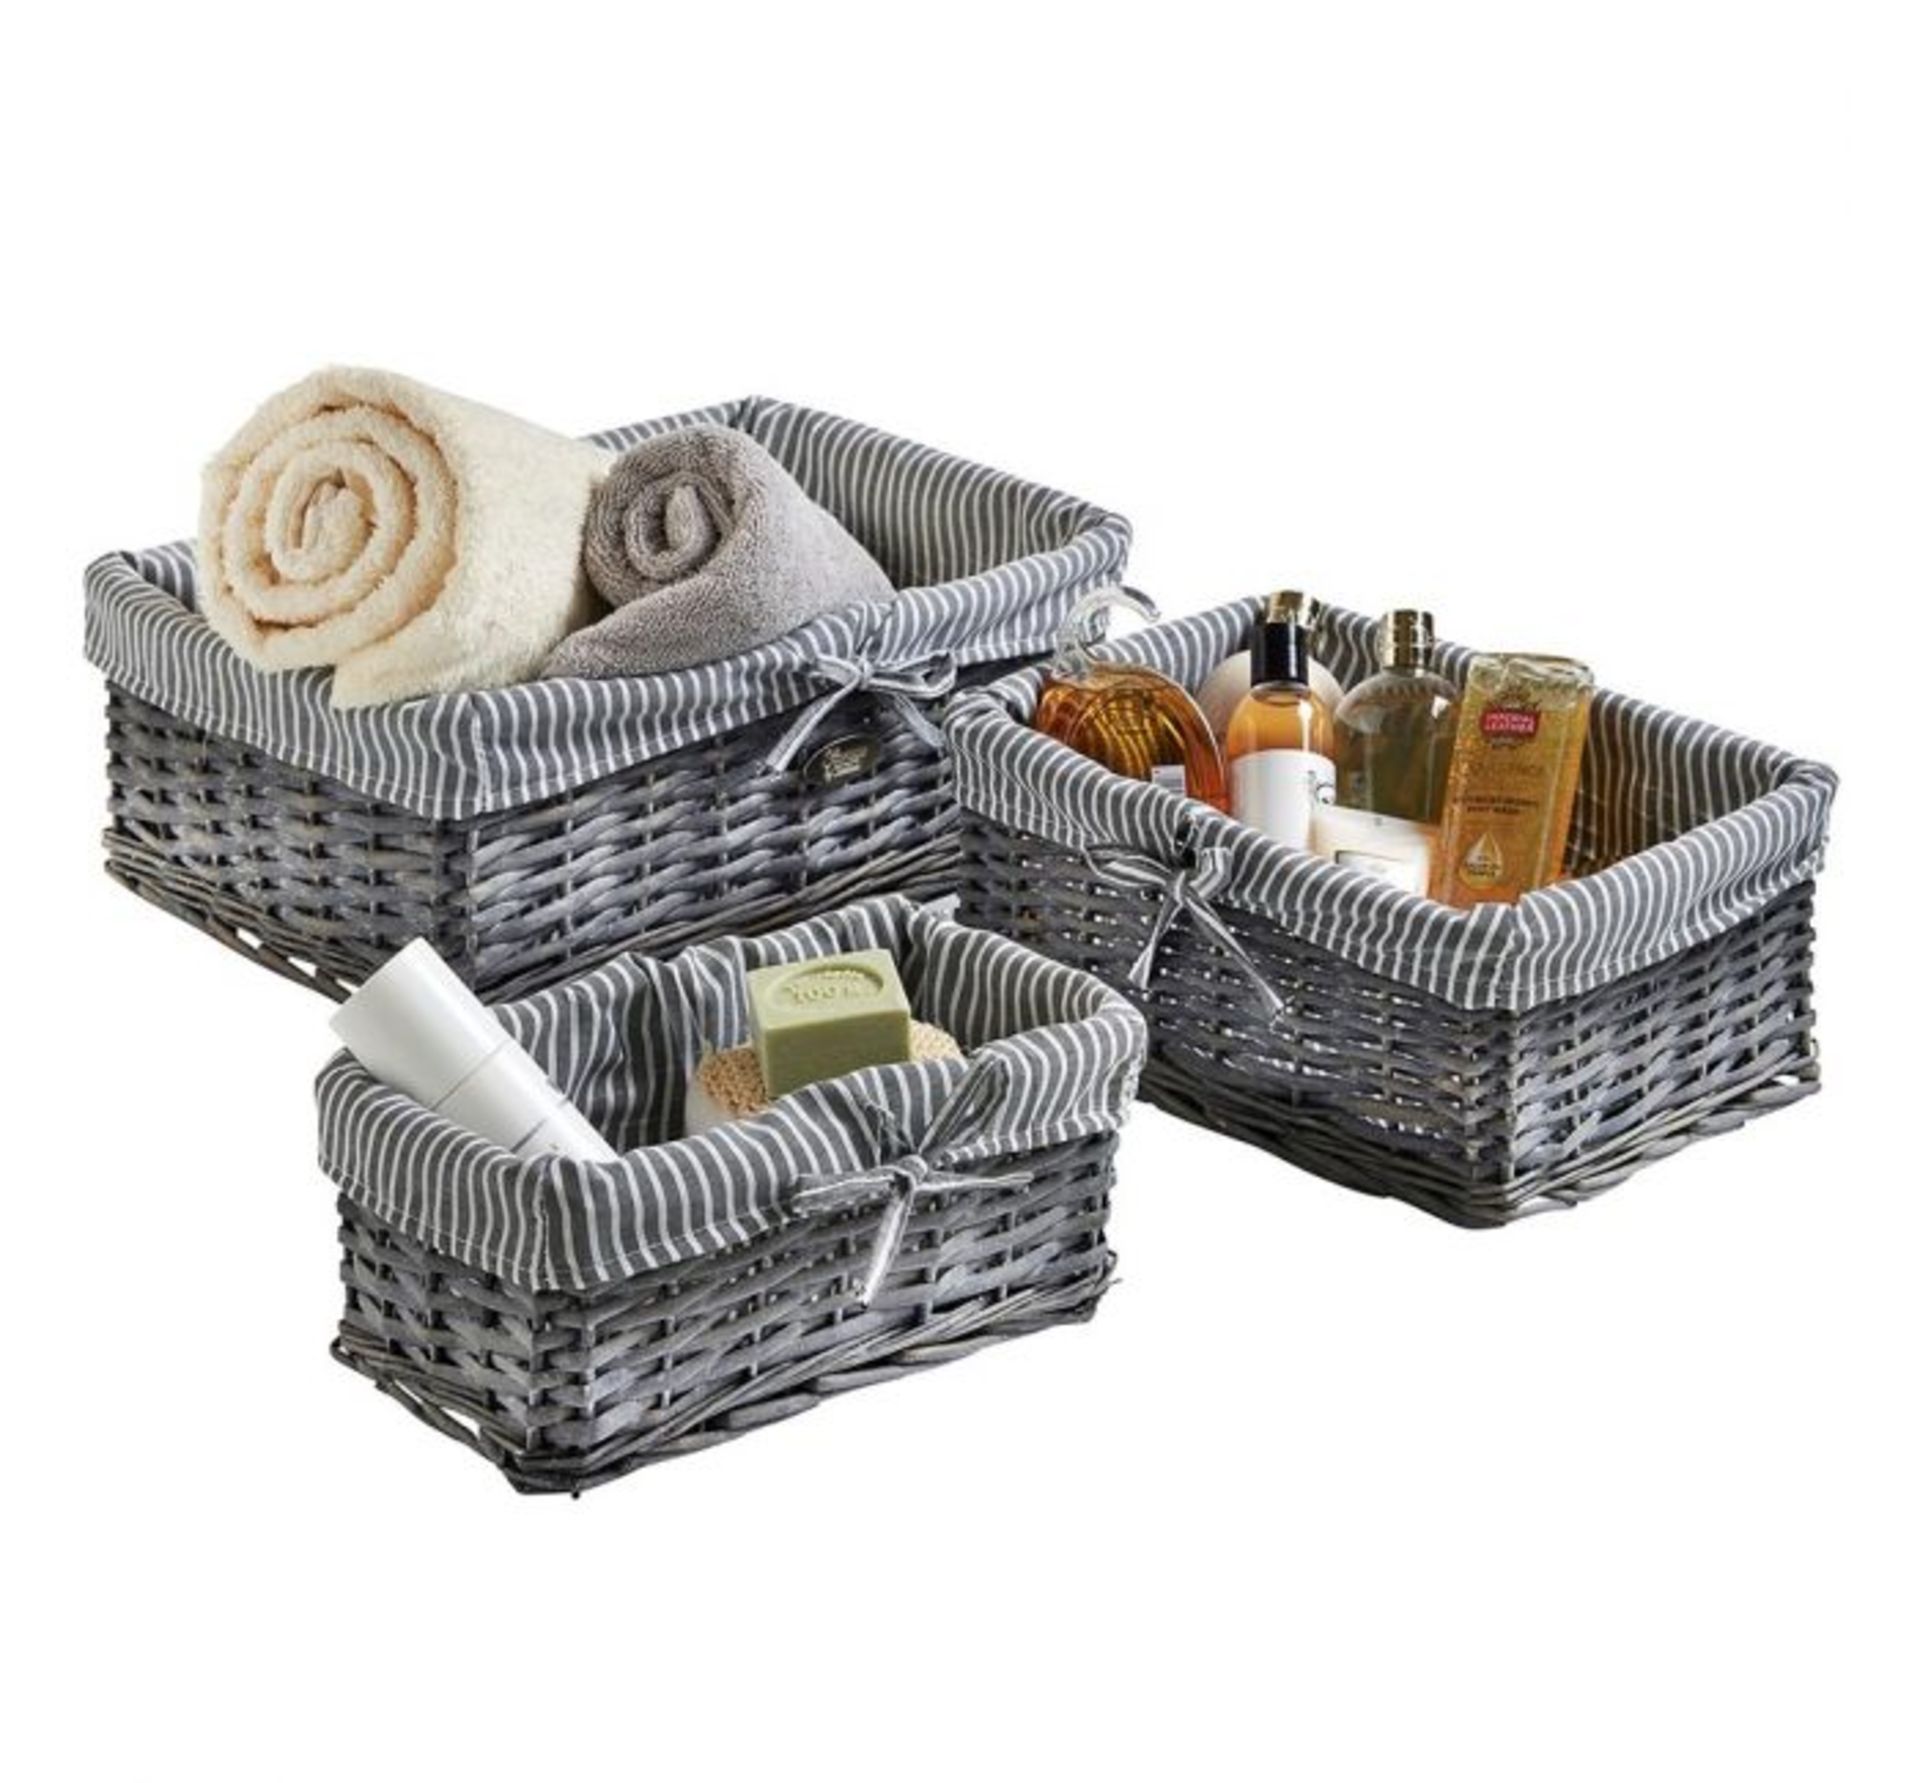 (OM30) Wicker Basket Set of 3 Perfect for clothing, accessories, beauty products, letters, pap... - Image 3 of 3